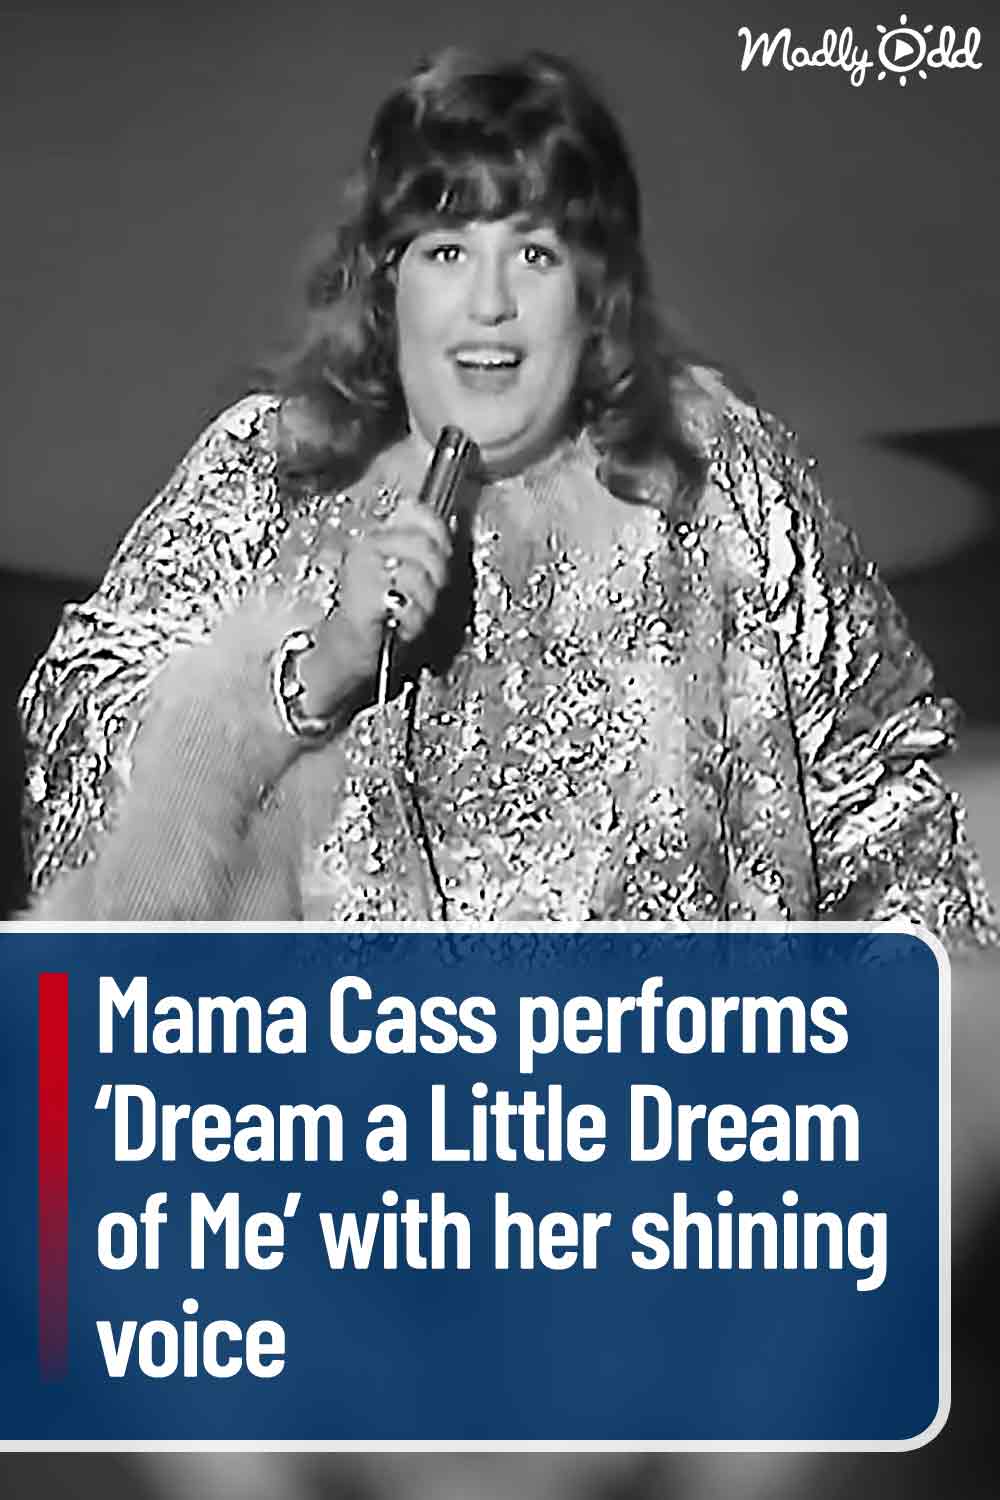 Mama Cass performs ‘Dream a Little Dream of Me’ with her shining voice